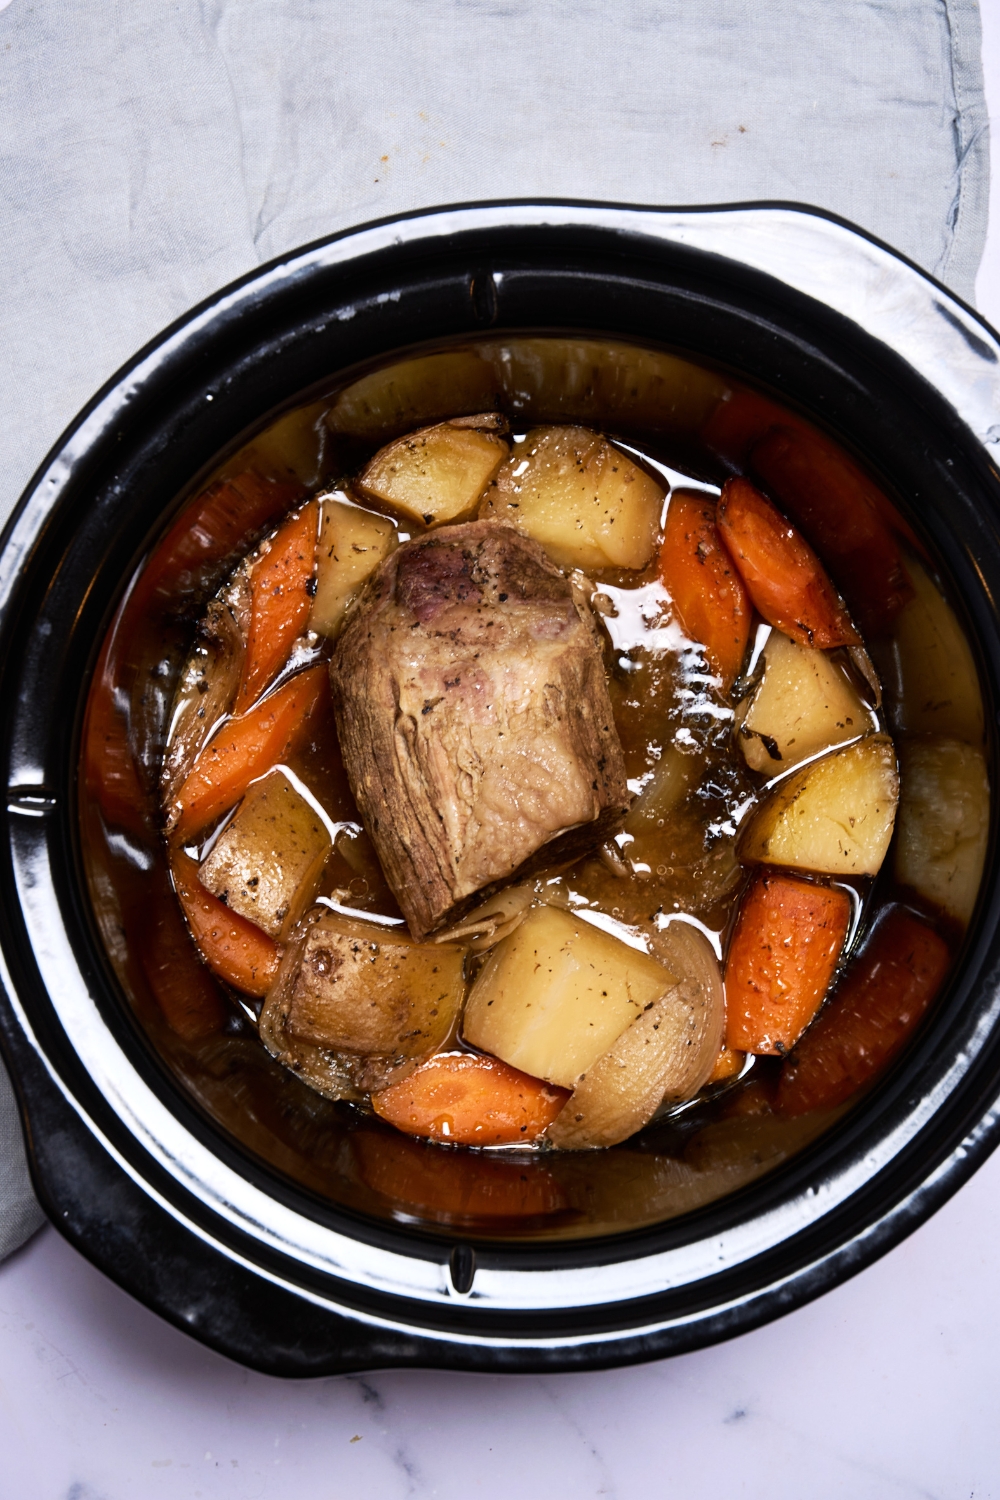 A cooked roast and vegetables sit in the slow cooker.